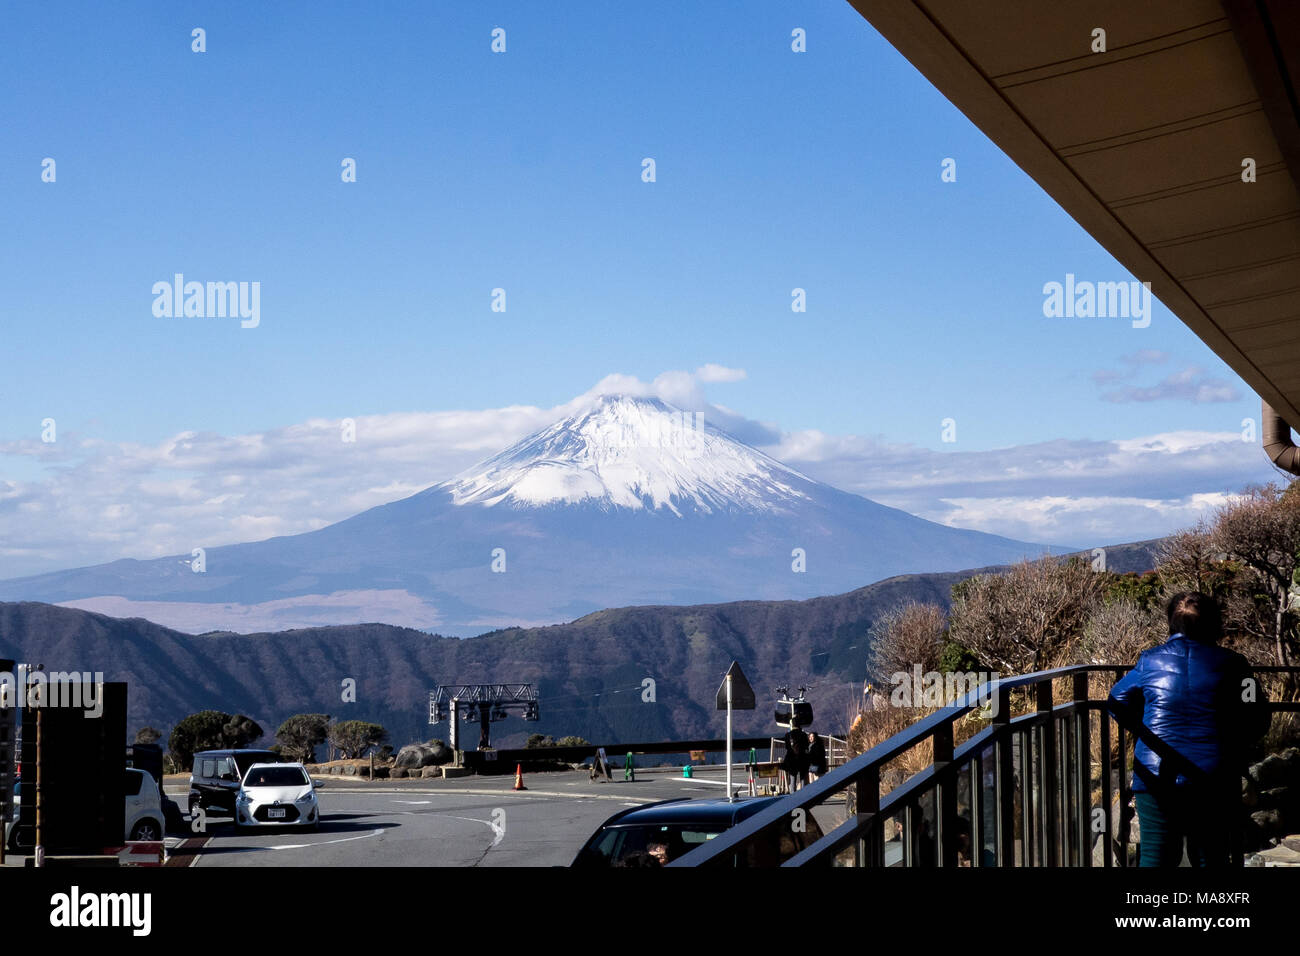 A view of Mount Fuji from Owakudani on Mount Hakone in Japan Stock Photo